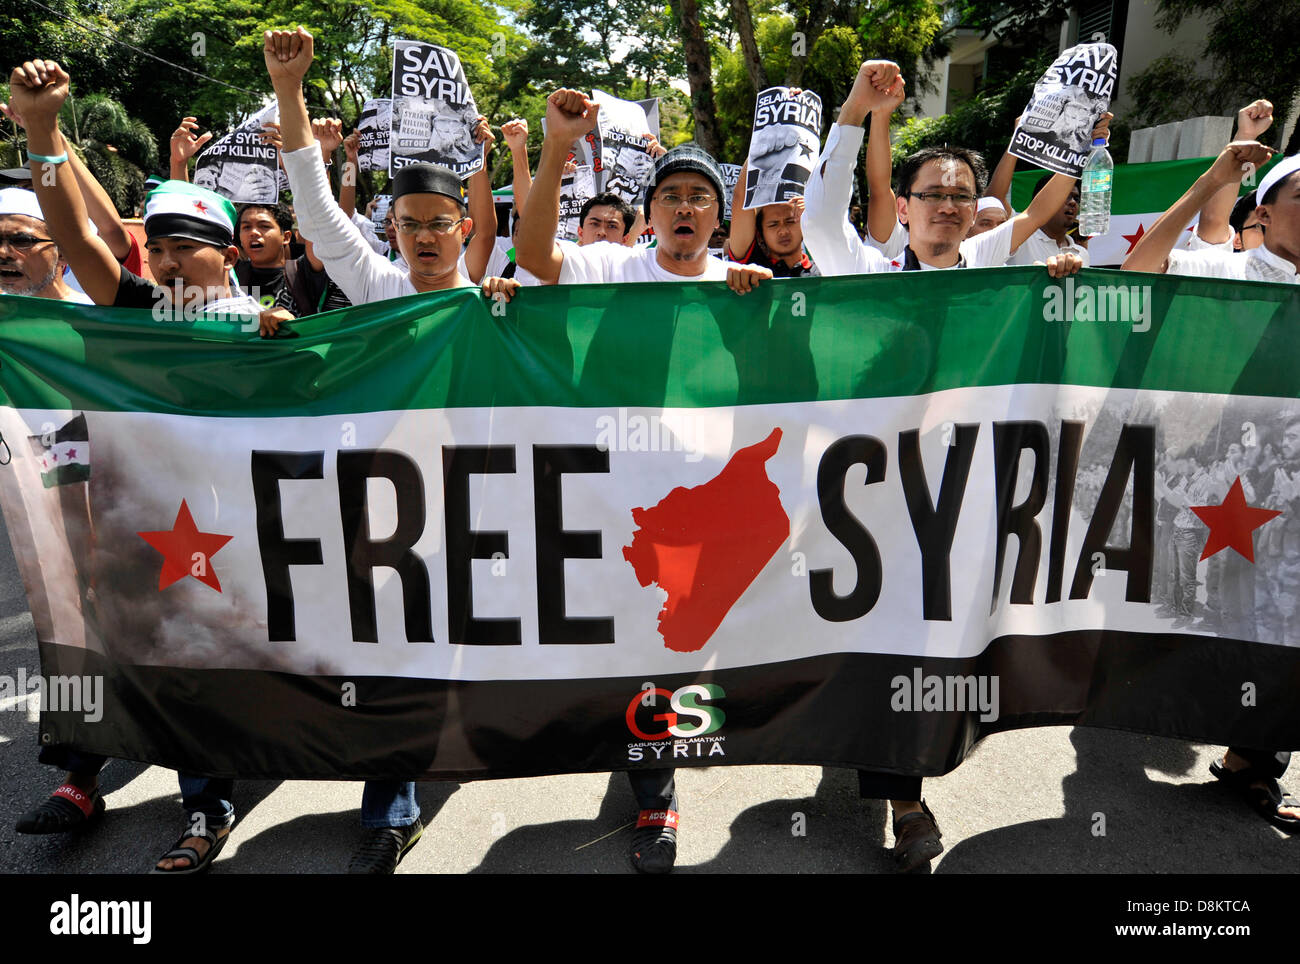 Kuala Lumpur, Malaysia. May 31, 2013. Demonstrators hold a banner as they march during a rally against Syria's President Bashar al-Assad and foreign intervention in Syrian crisis, outside the Iran embassy in Kuala Lumpur. Credit:  ZUMA Press, Inc./Alamy Live News Stock Photo